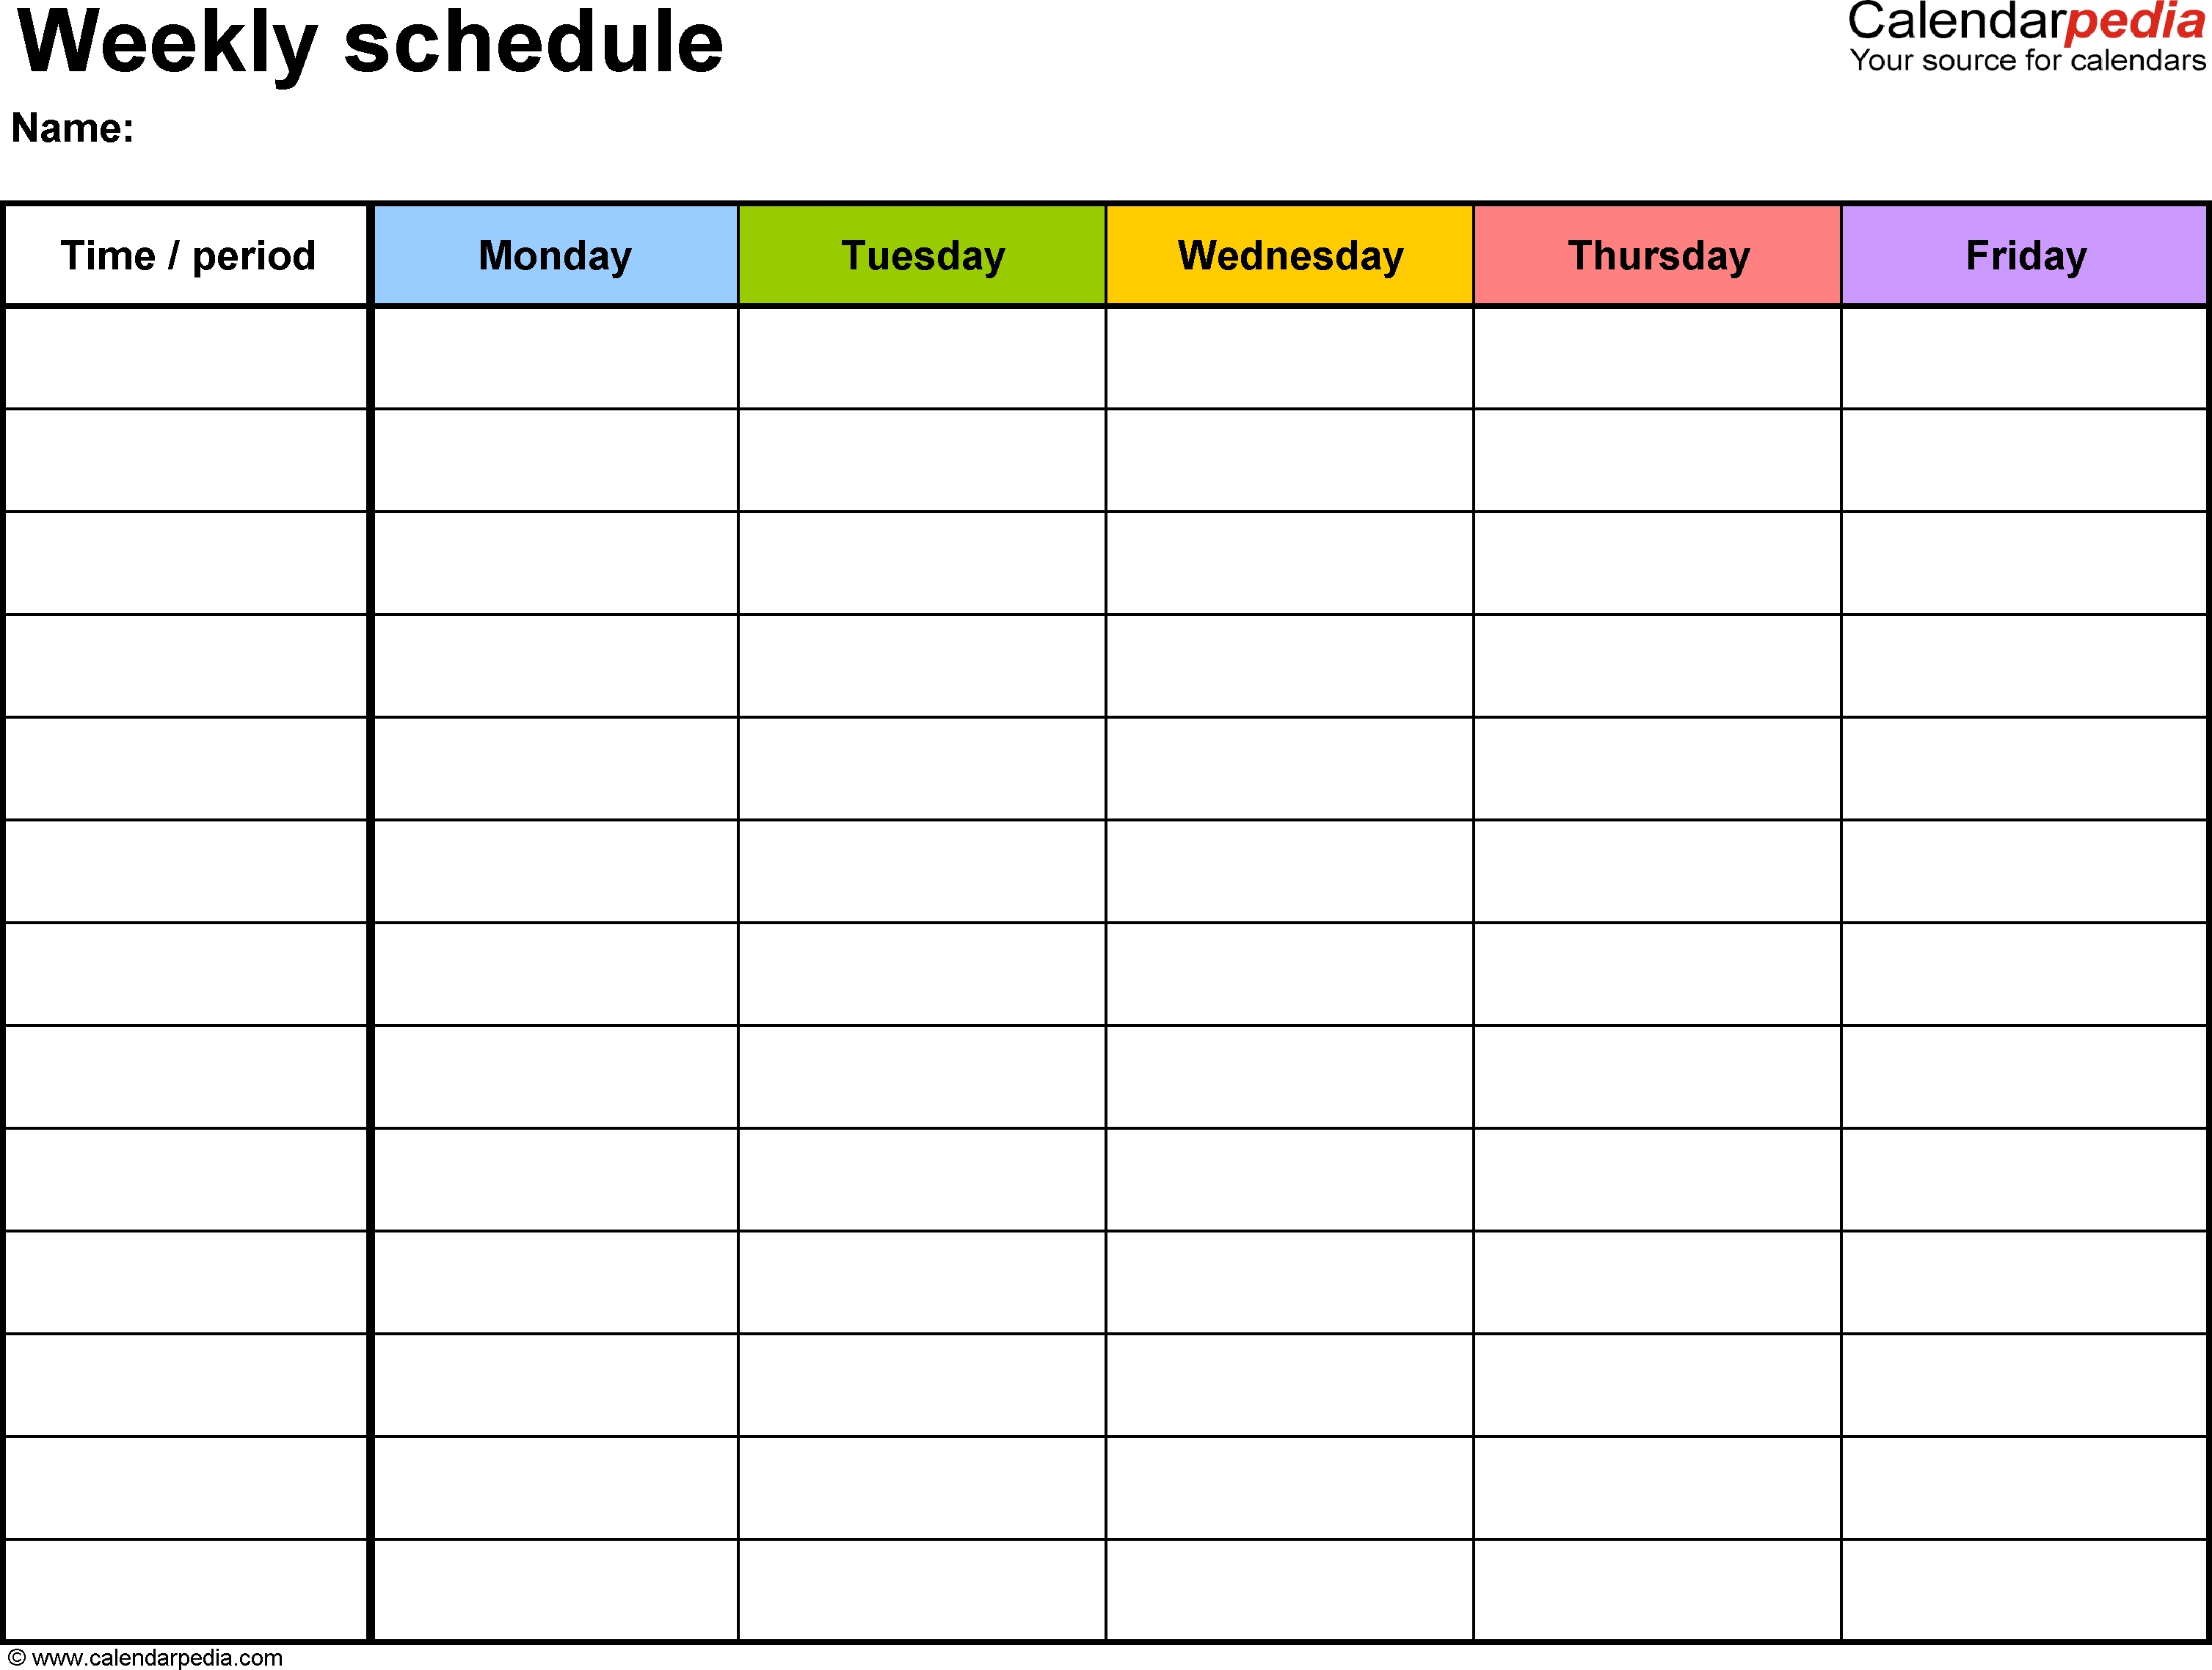 Free Weekly Schedule Templates For Excel - 18 Templates pertaining to Weekly Calendar With Hours Printable